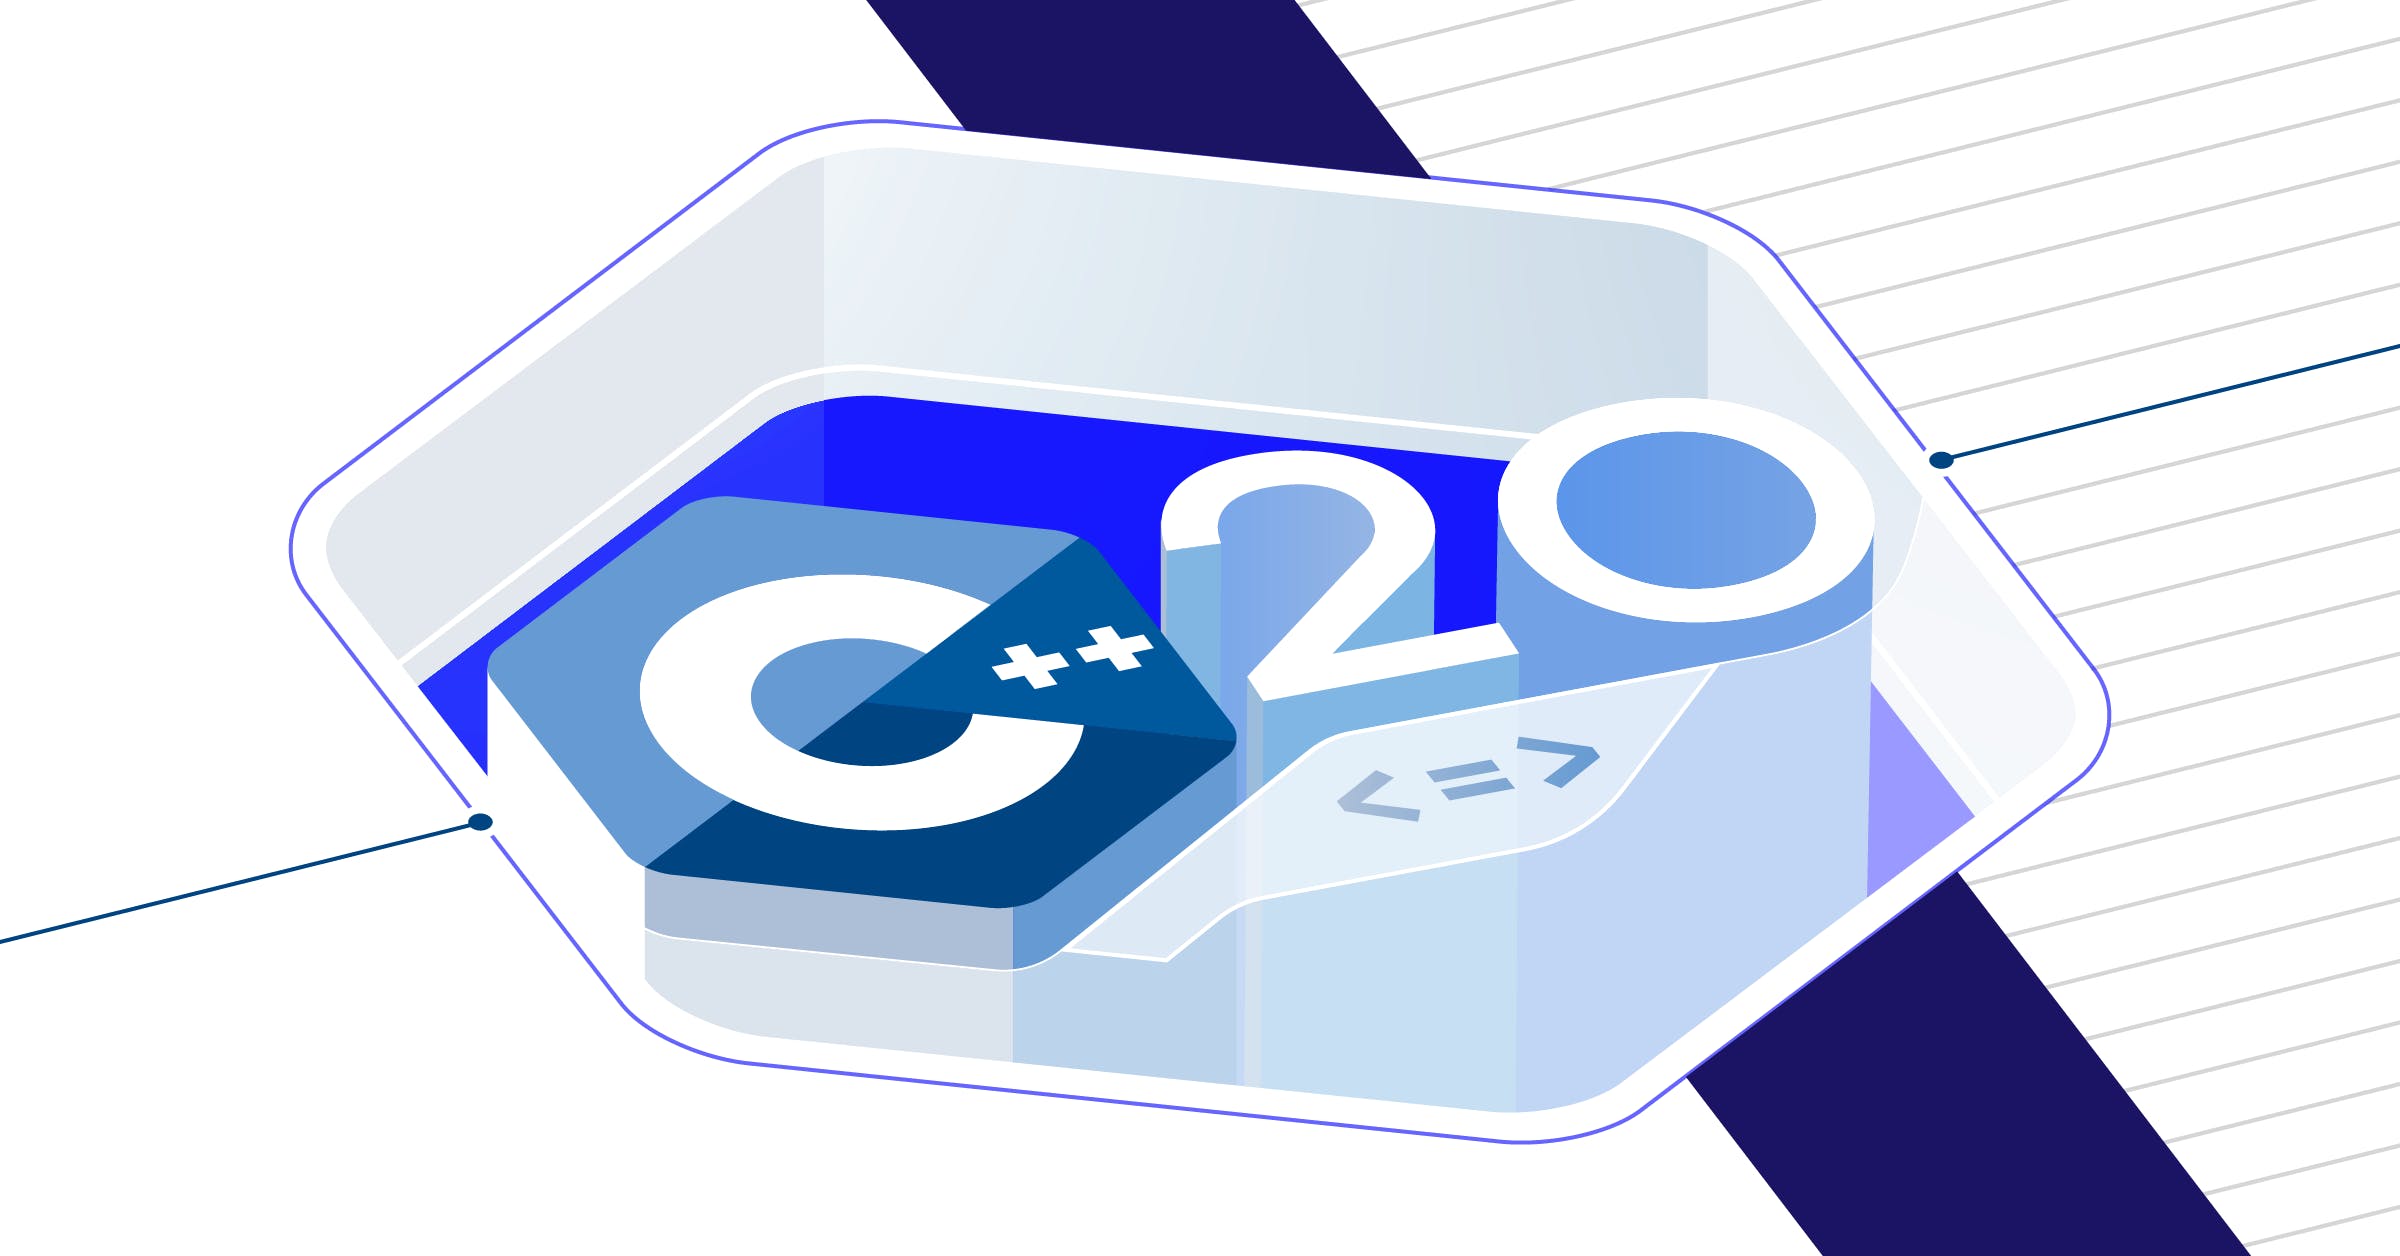 C++20 is here! It's a big release with many features designed to make your code easier, faster and safer. Let's see how the latest C++ analysis rules in SonarLint, SonarQube and SonarClou...